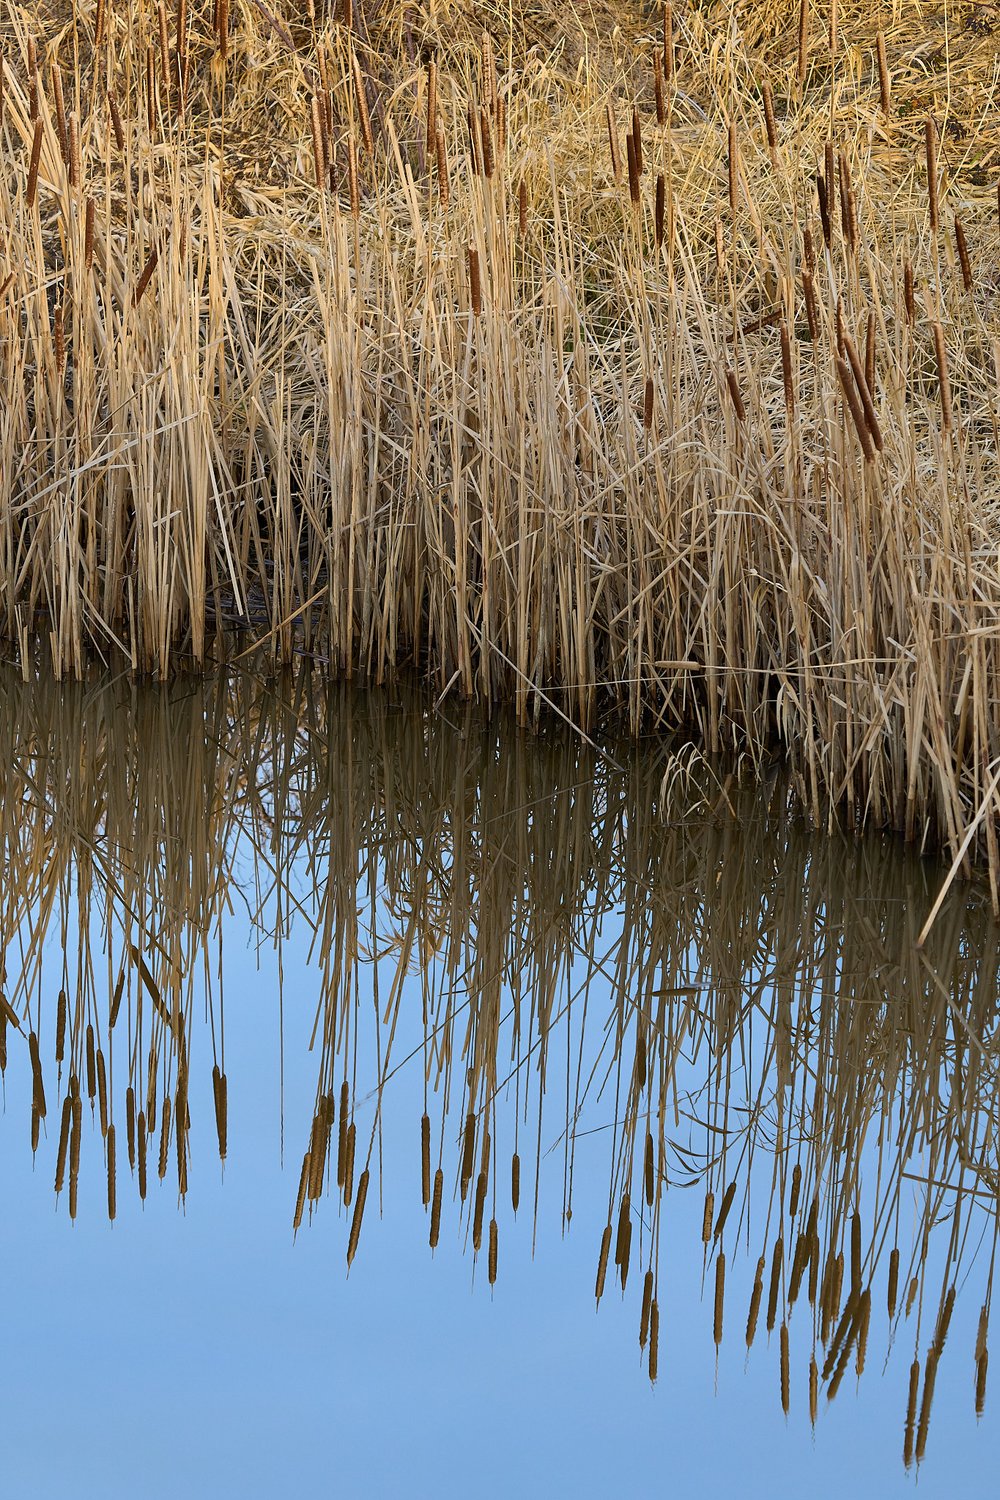 Reeds along the river